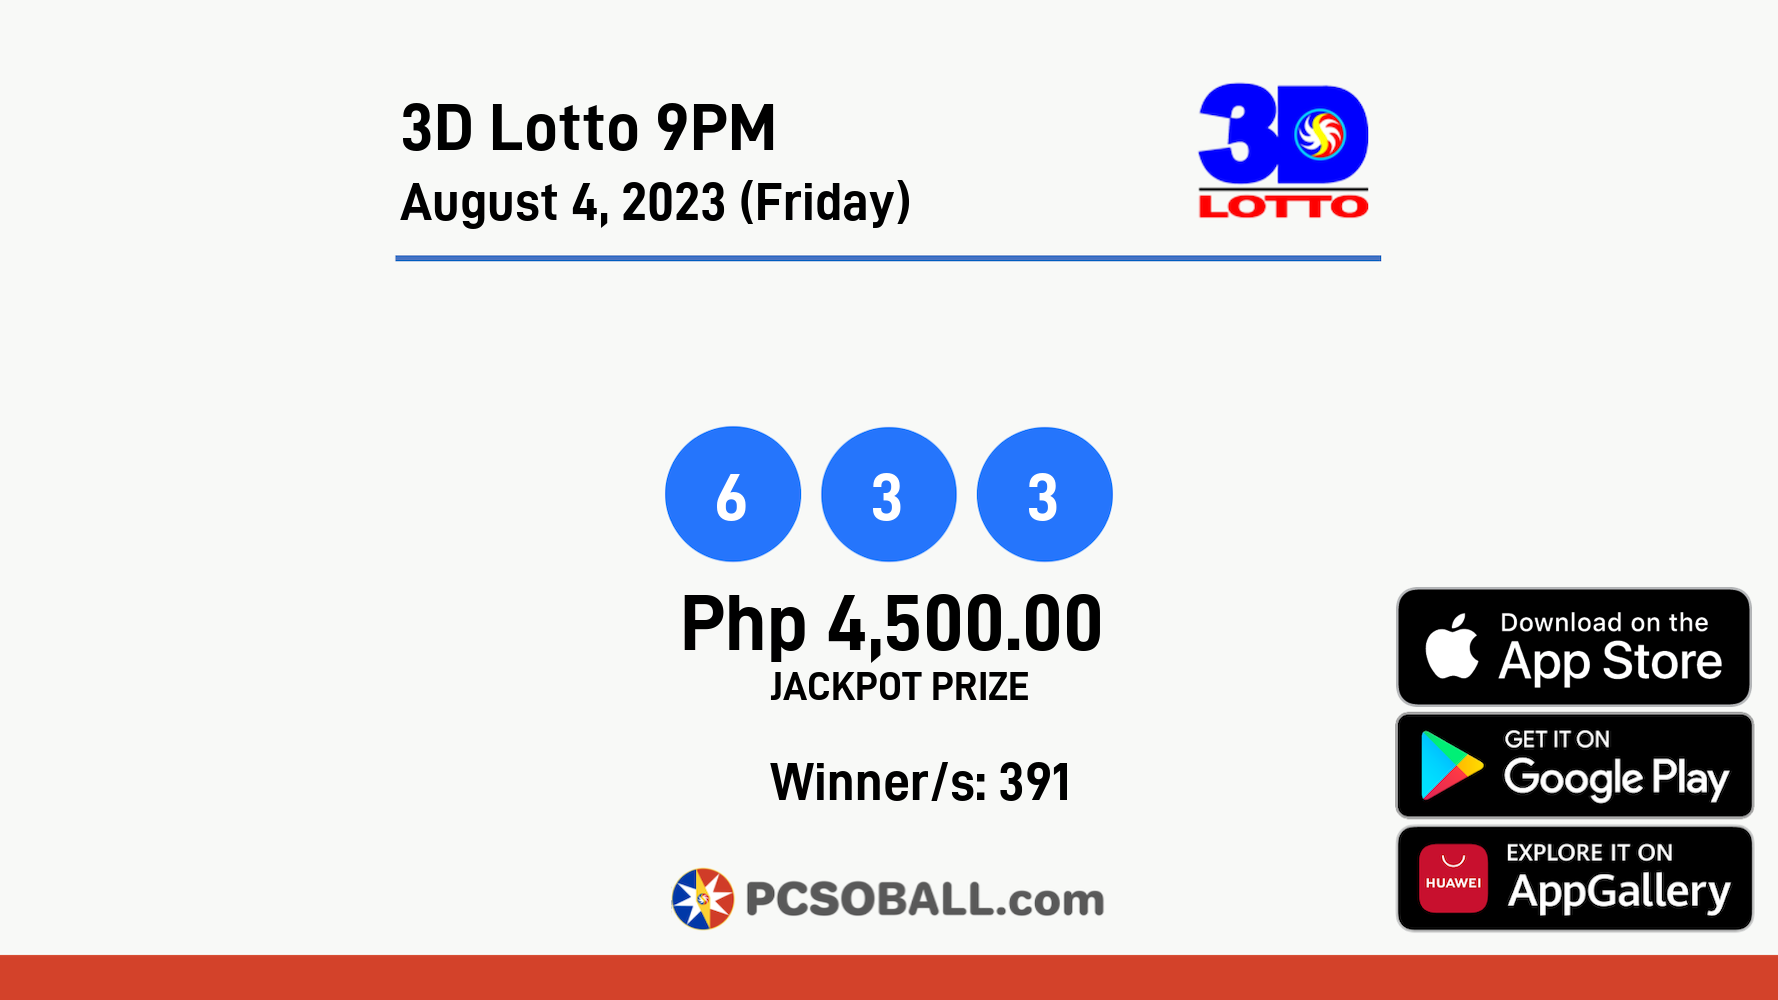 3D Lotto 9PM August 4, 2023 (Friday) Result